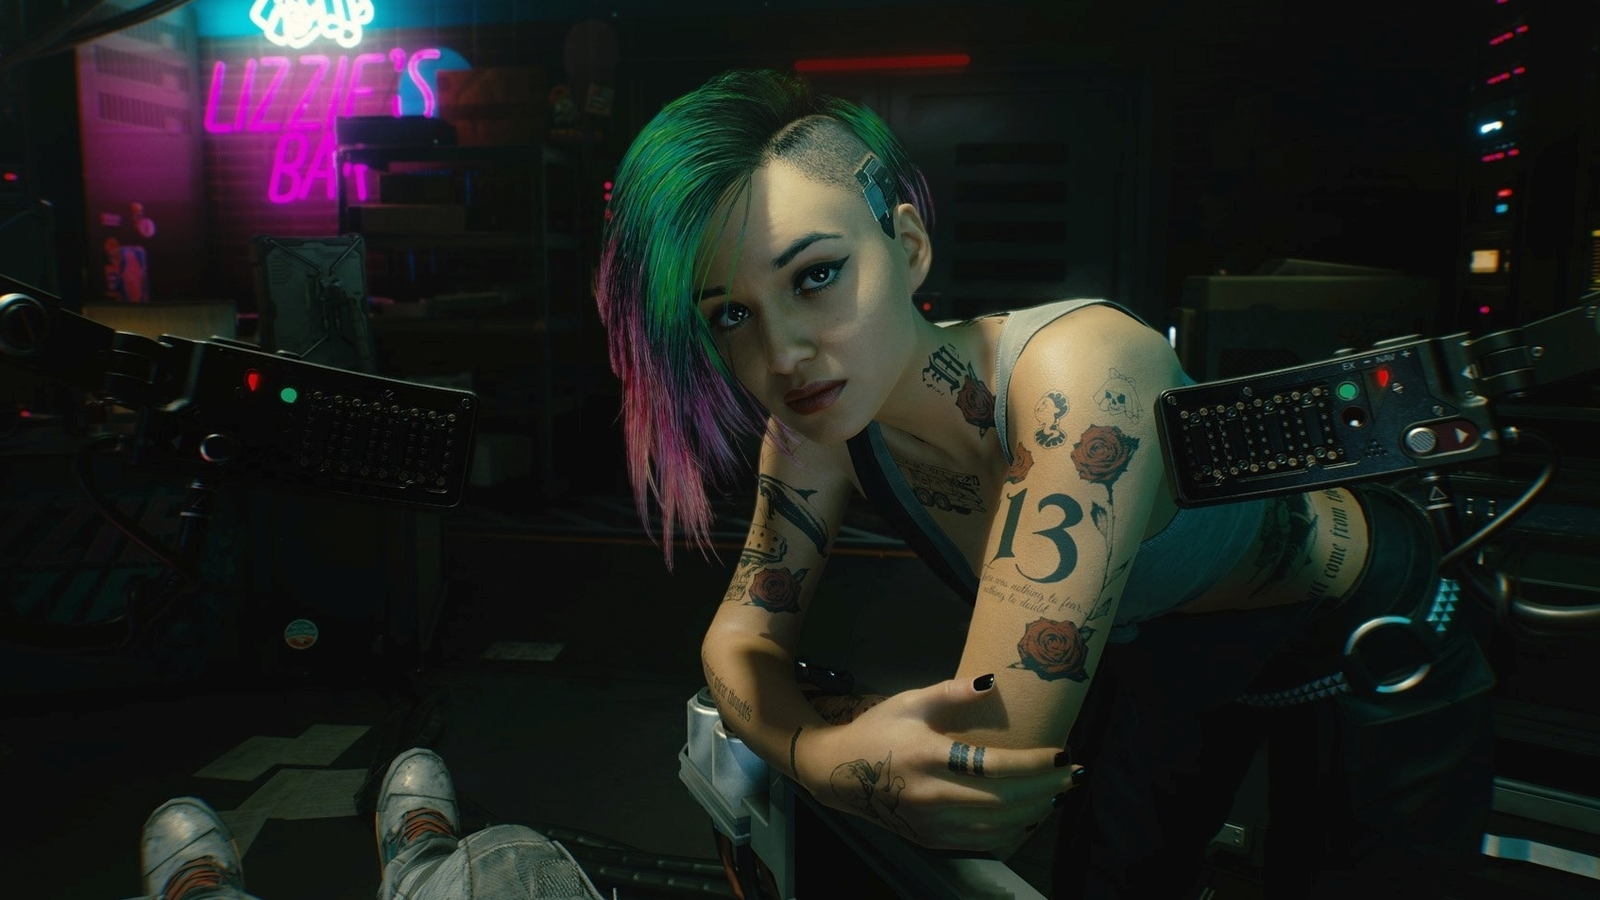 1920x1080 Cyberpunk 2077 4k 2020 Game Laptop Full HD 1080P ,HD 4k Wallpapers ,Images,Backgrounds,Photos and Pictures